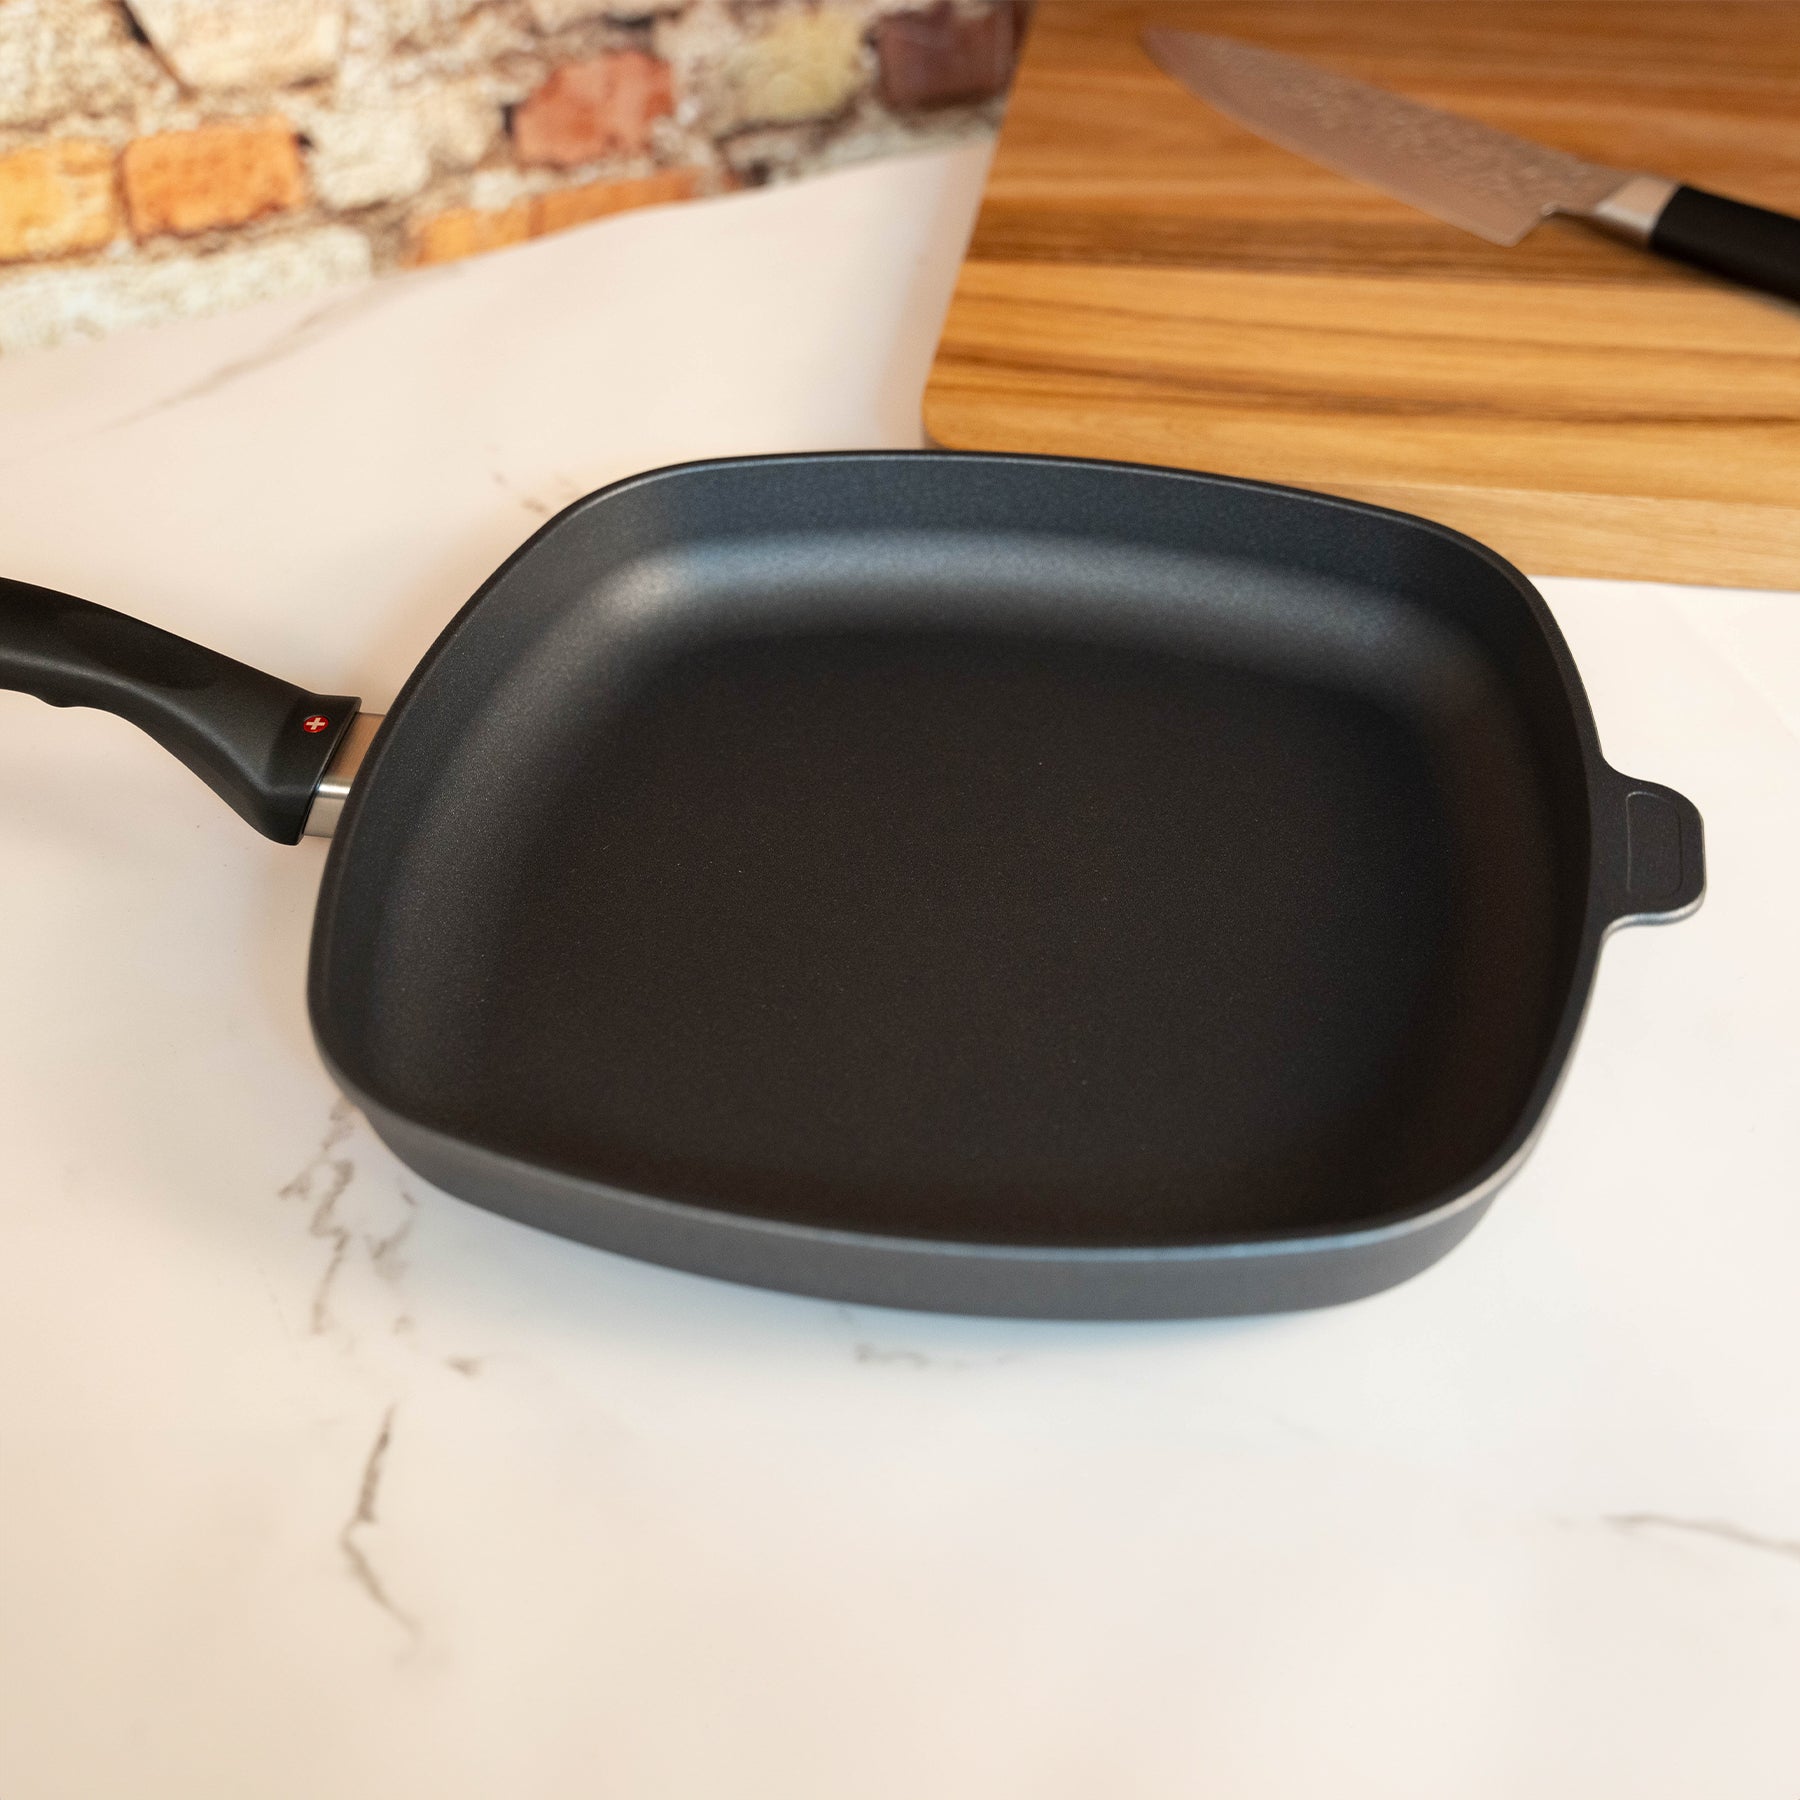 HD Nonstick 11" x 11" Square Fry Pan on kitchen counter with a side angled view